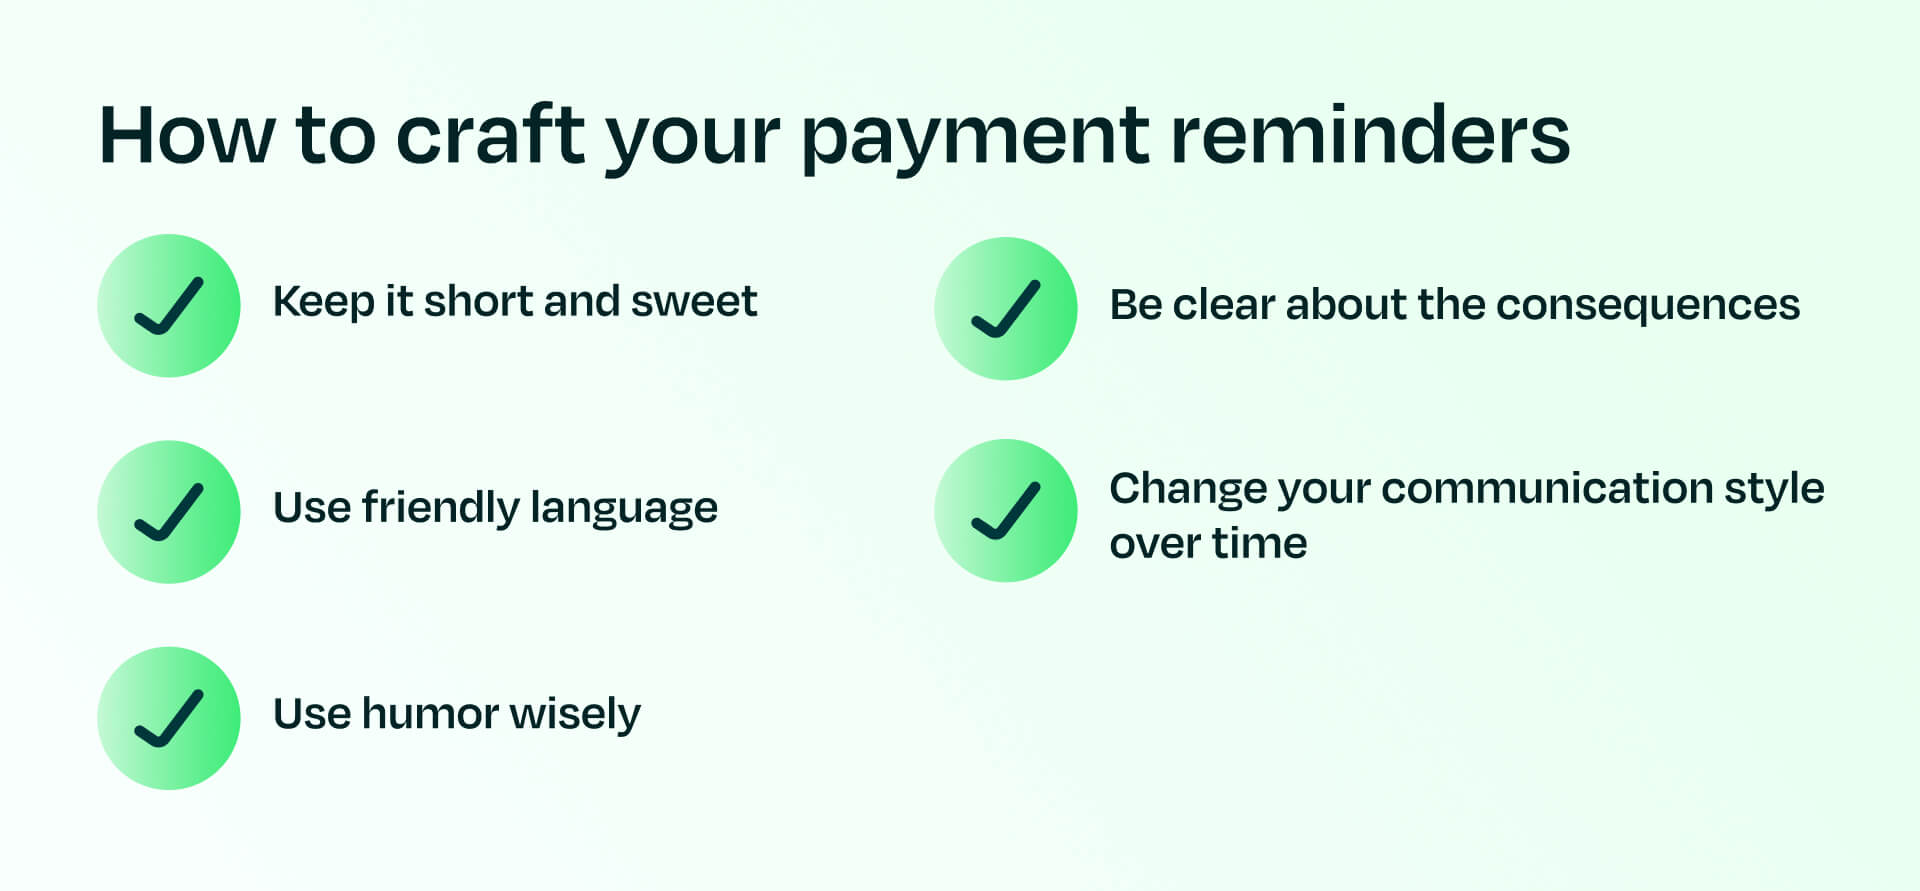 How to craft your payment reminders list